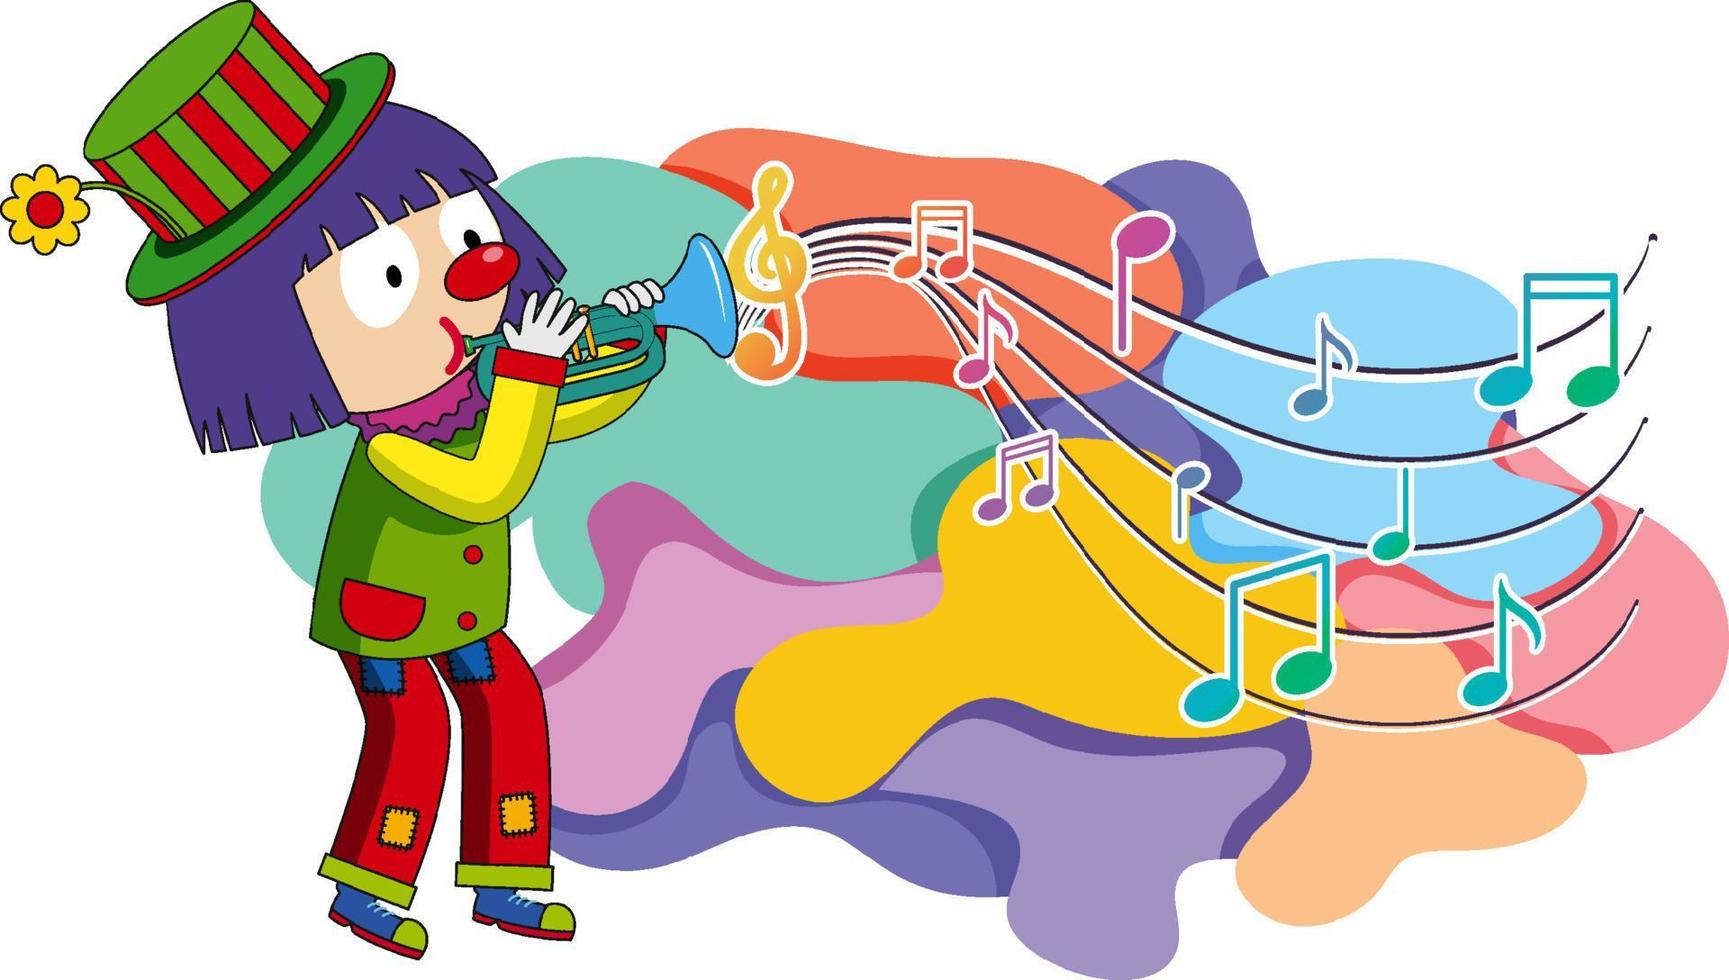 Clown blowing trumpet with music notes on white background vector